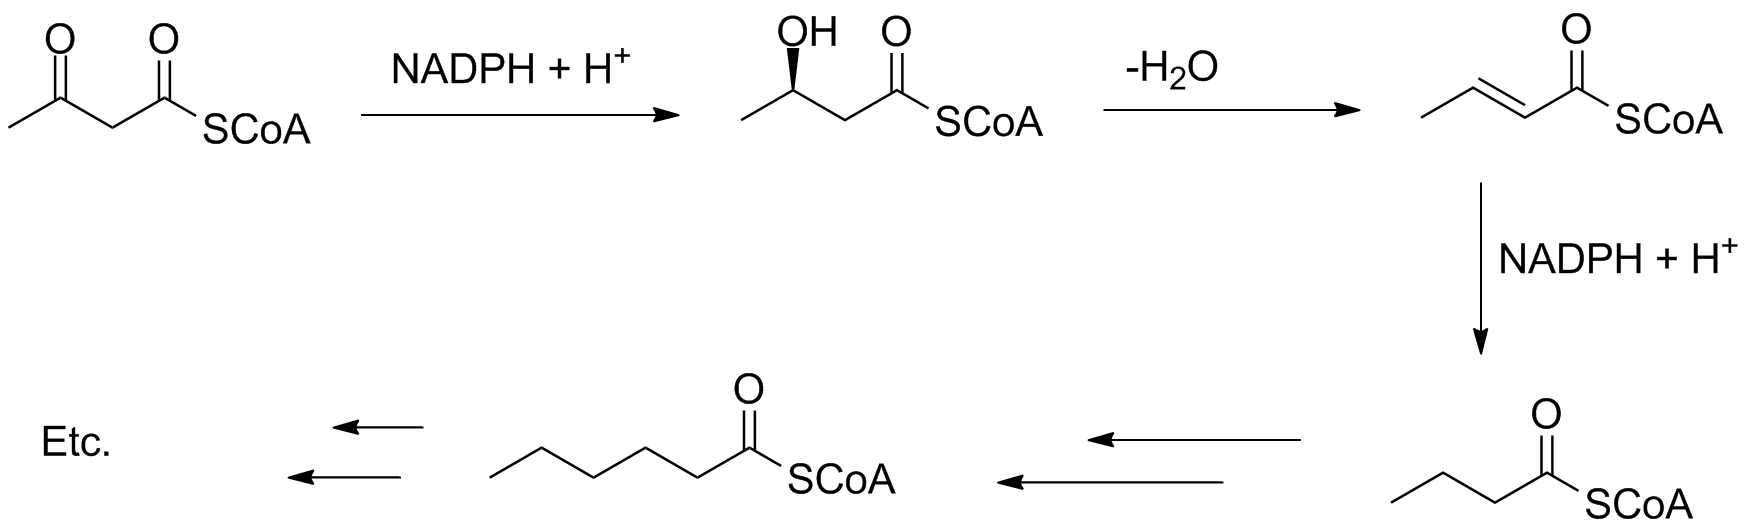 FA_synth.png Fatty acid synthesis involves reduction of the keto group, elimination of water, and reduction of the double bond. This is repeated as necessary to build up as many carbons as needed.